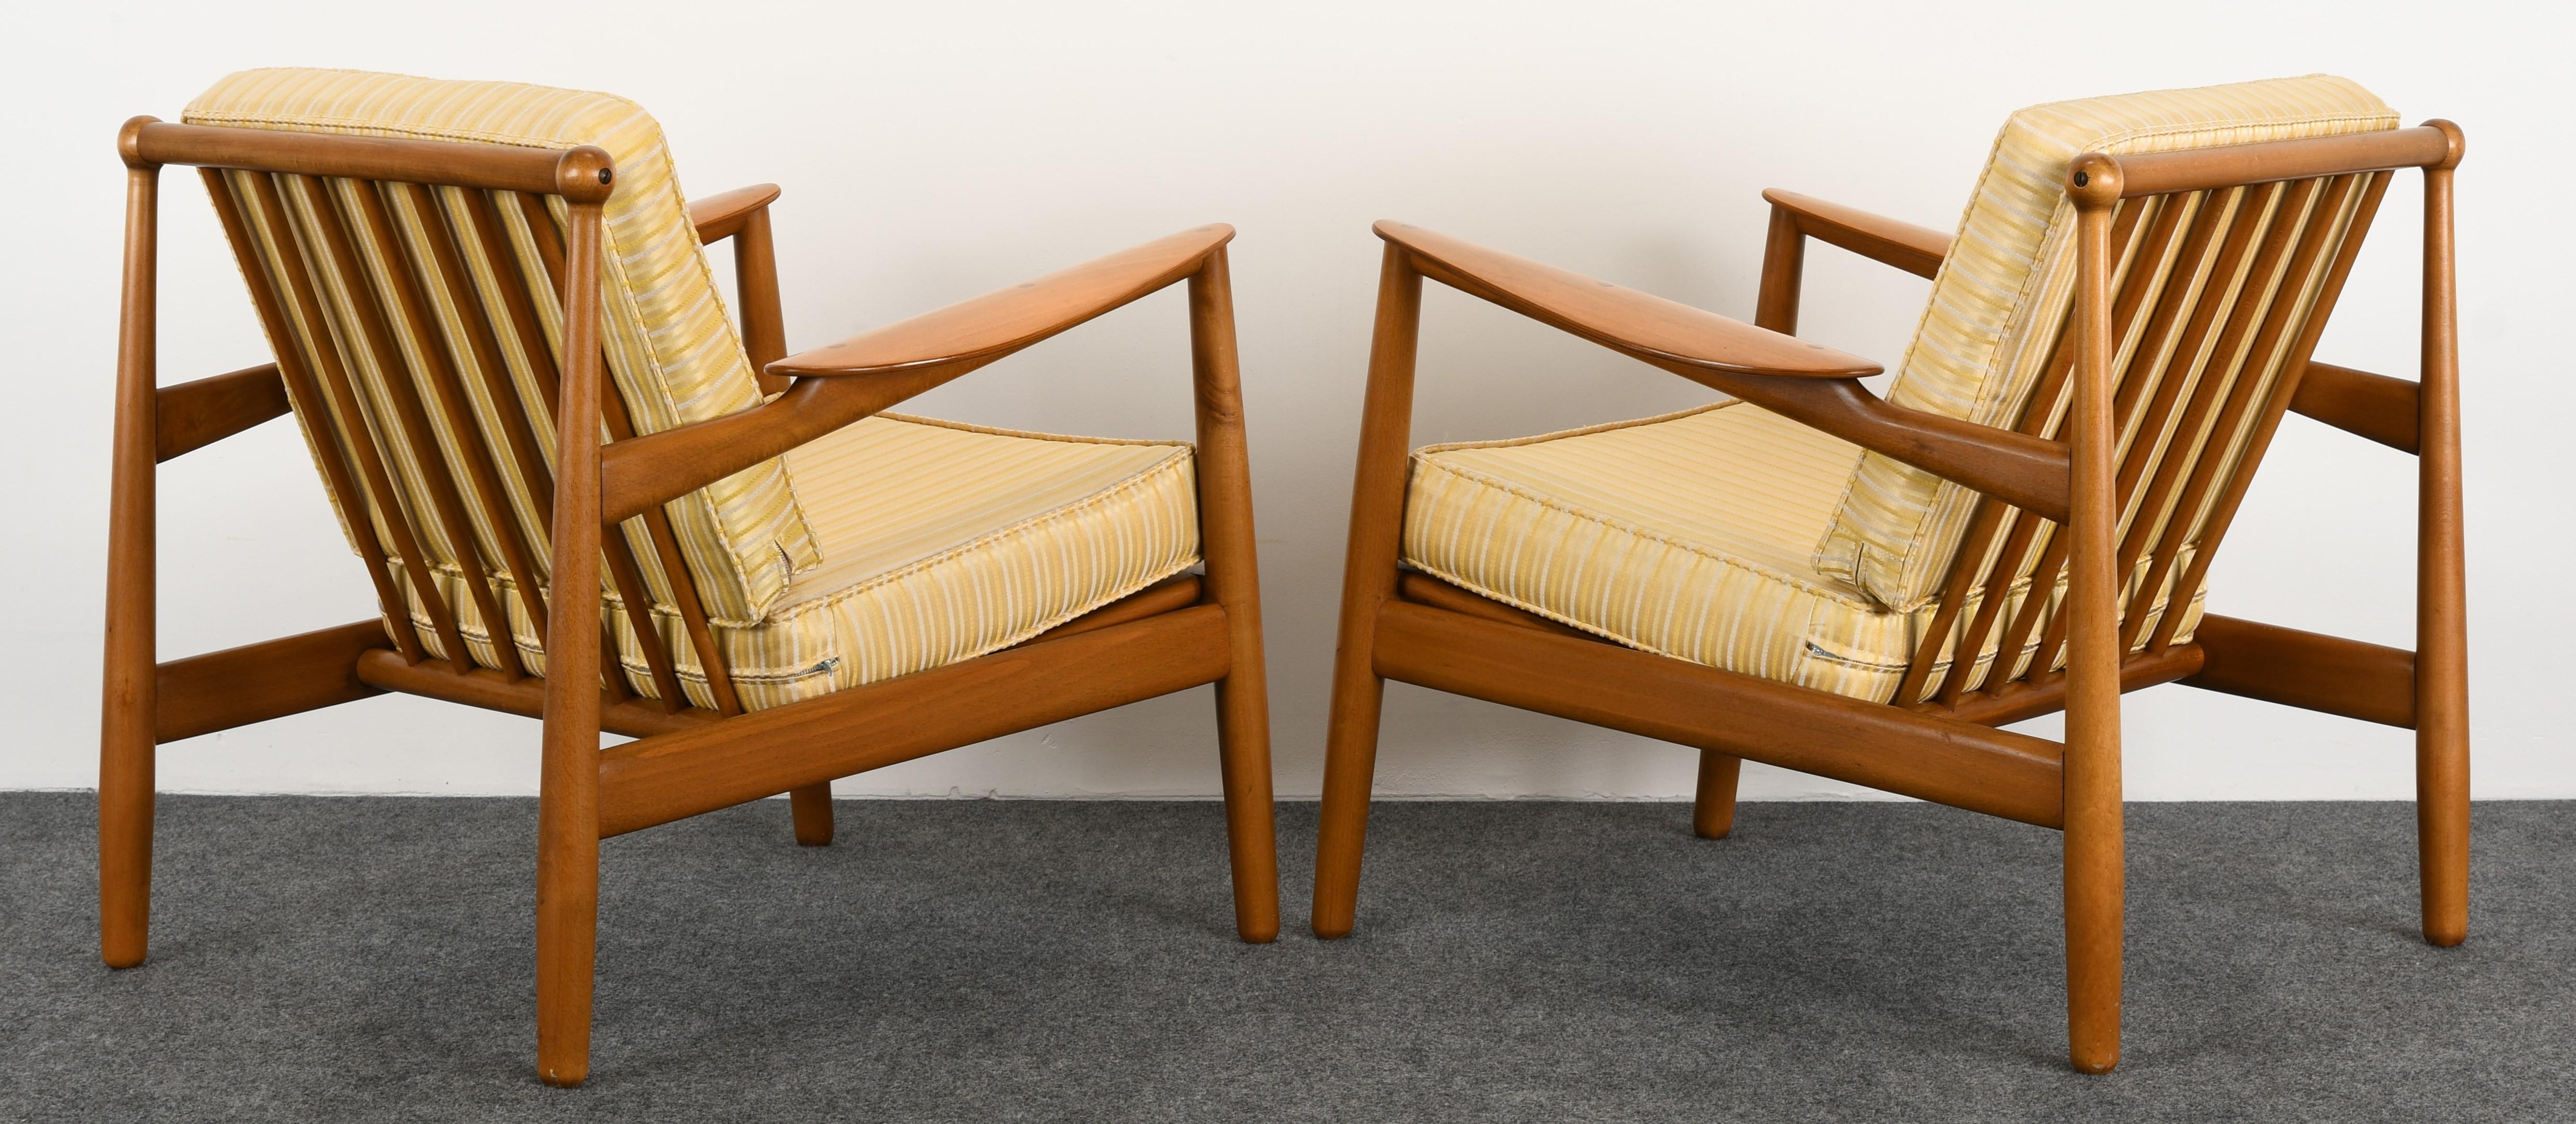 Mid-20th Century Pair of Danish Modern Chairs by P. Jeppesen, 1955